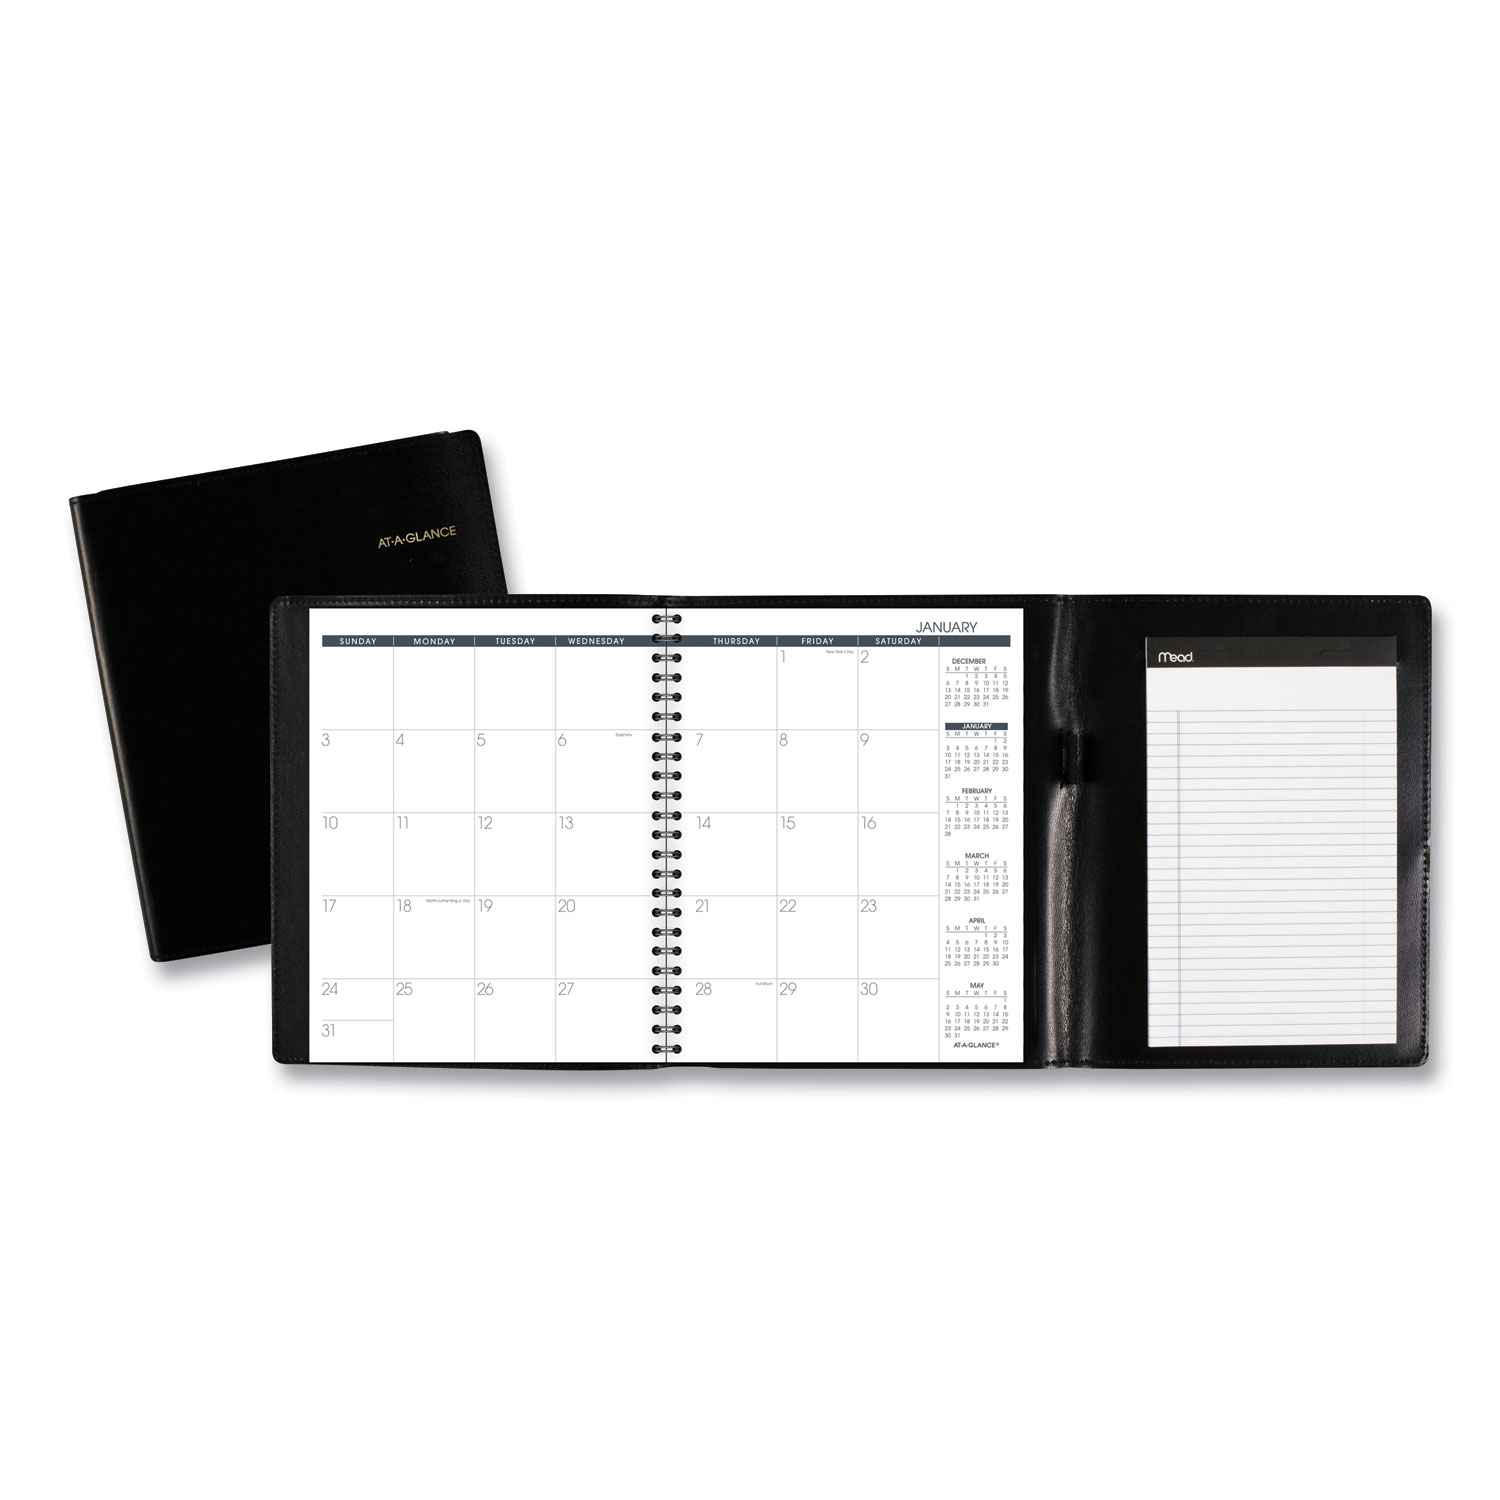  AT-A-GLANCE 70120P05 Plus Monthly Planner, 8 3/4 x 6 7/8, Black, 2020 (AAG70120P05) 